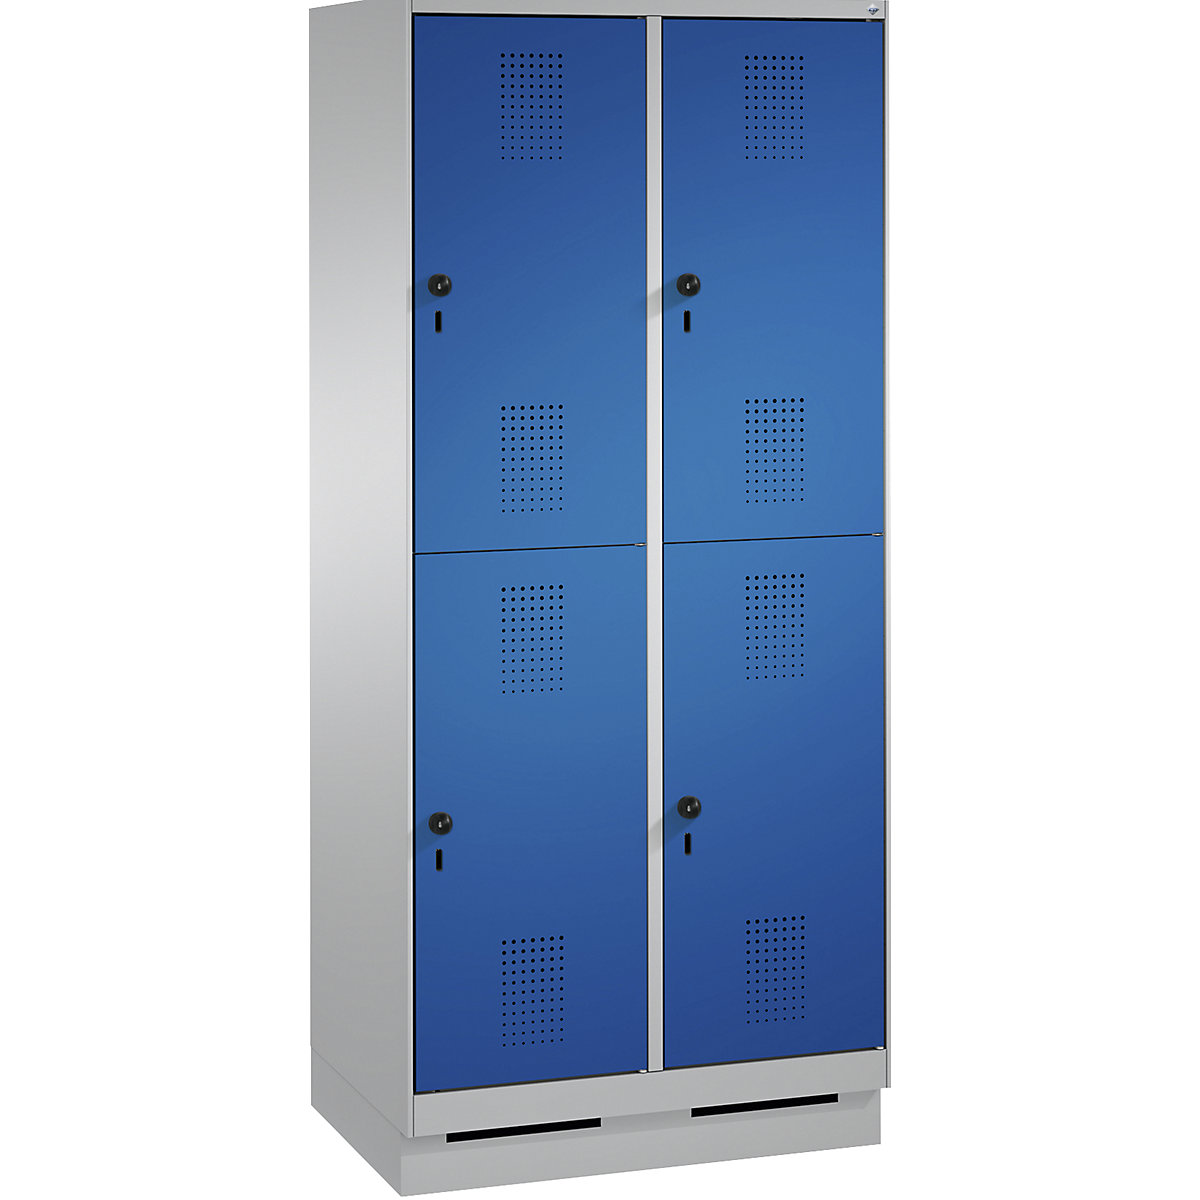 EVOLO cloakroom locker, double tier, with plinth – C+P, 2 compartments, 2 shelf compartments each, compartment width 400 mm, white aluminium / gentian blue-11